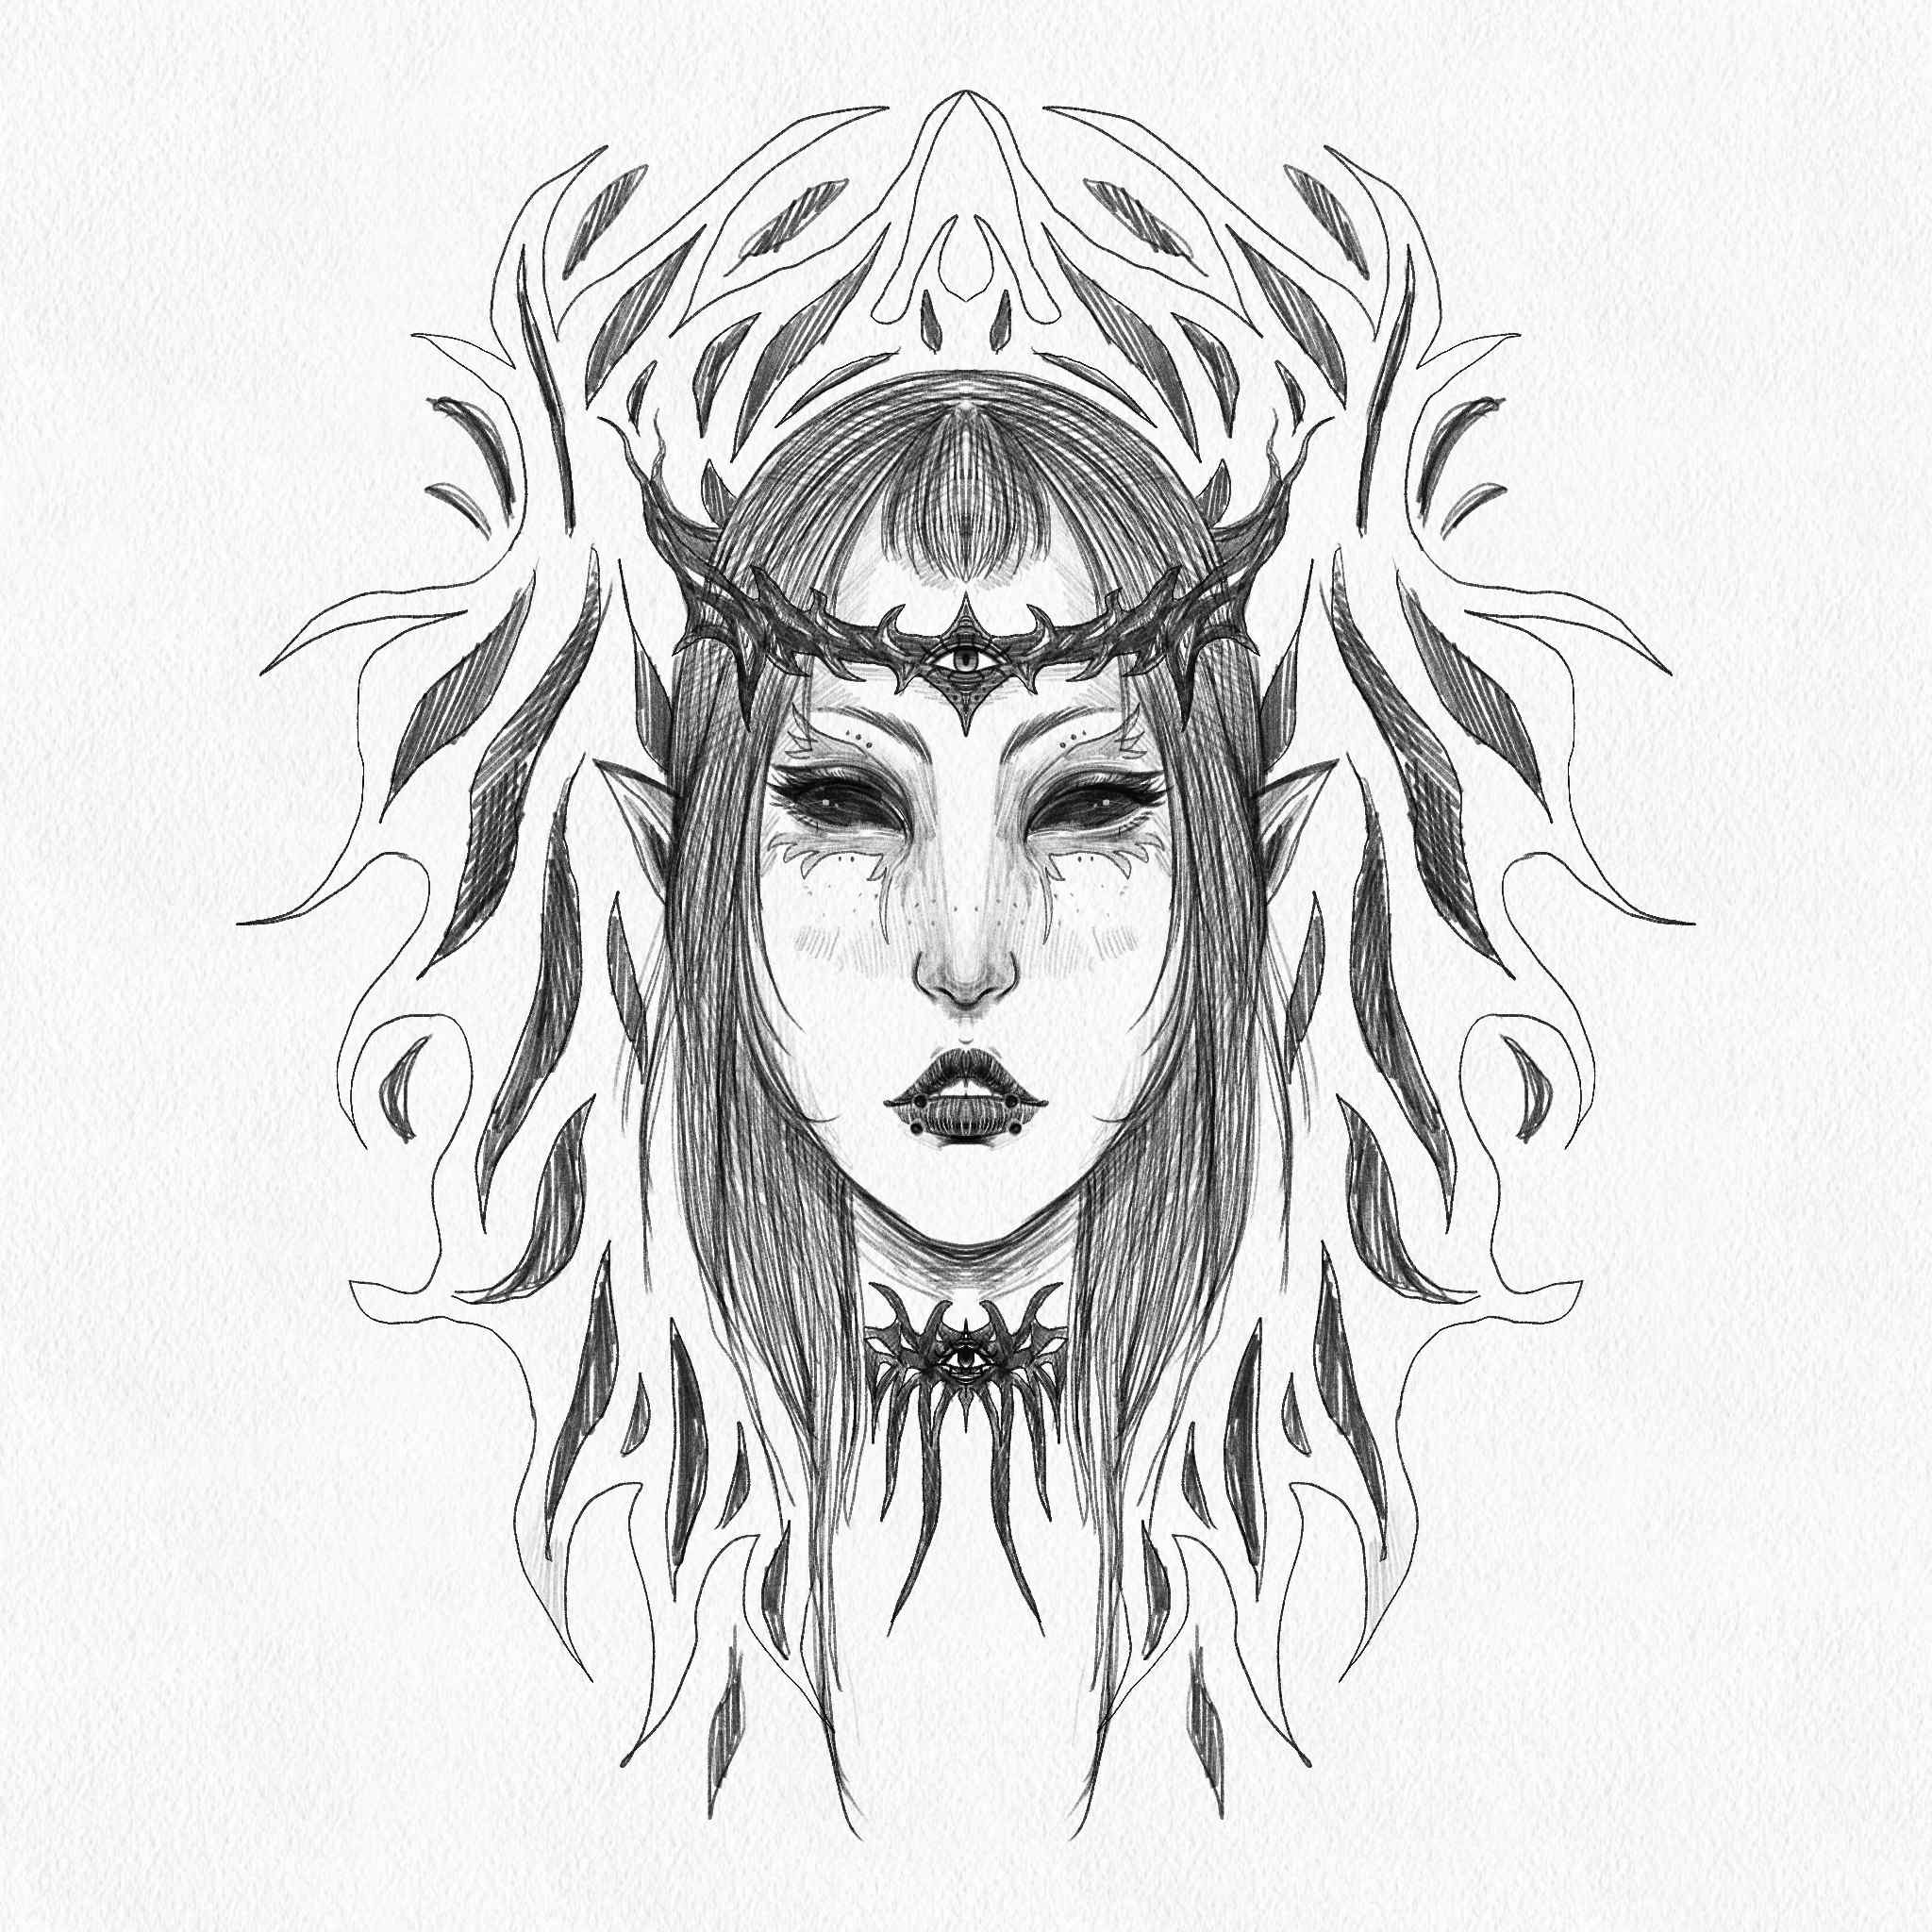 digital symmetrical pencil drawing of a pointy eared woman with medium length hair. Her eyes are solid black, and she wears a color and crown that are shaped like flames.